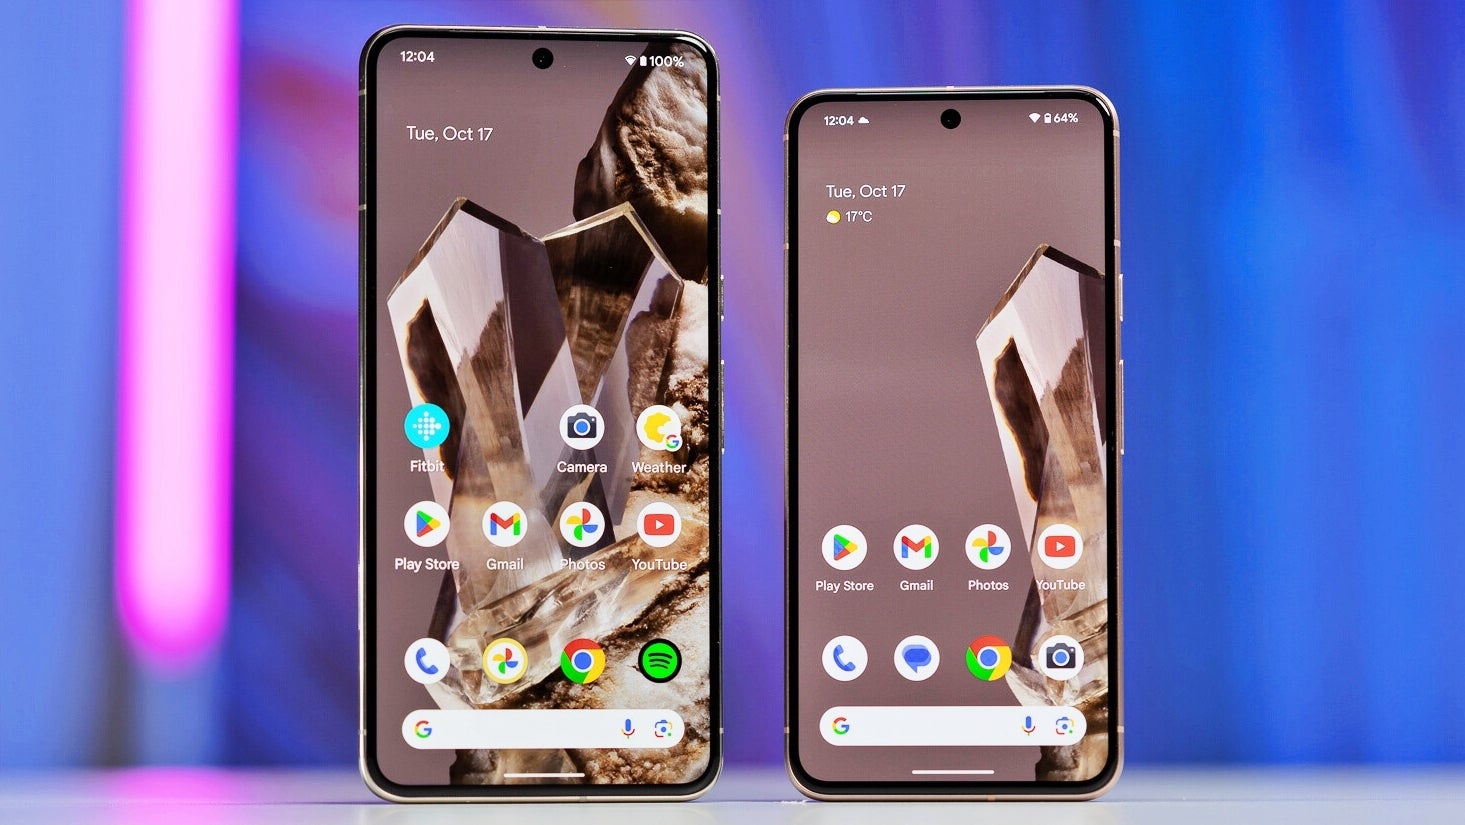 Google is pulling an Apple on us. - FYI: Google is doing the cheaper Pixel 8 dirty with absurd tricks even Apple would be jealous of